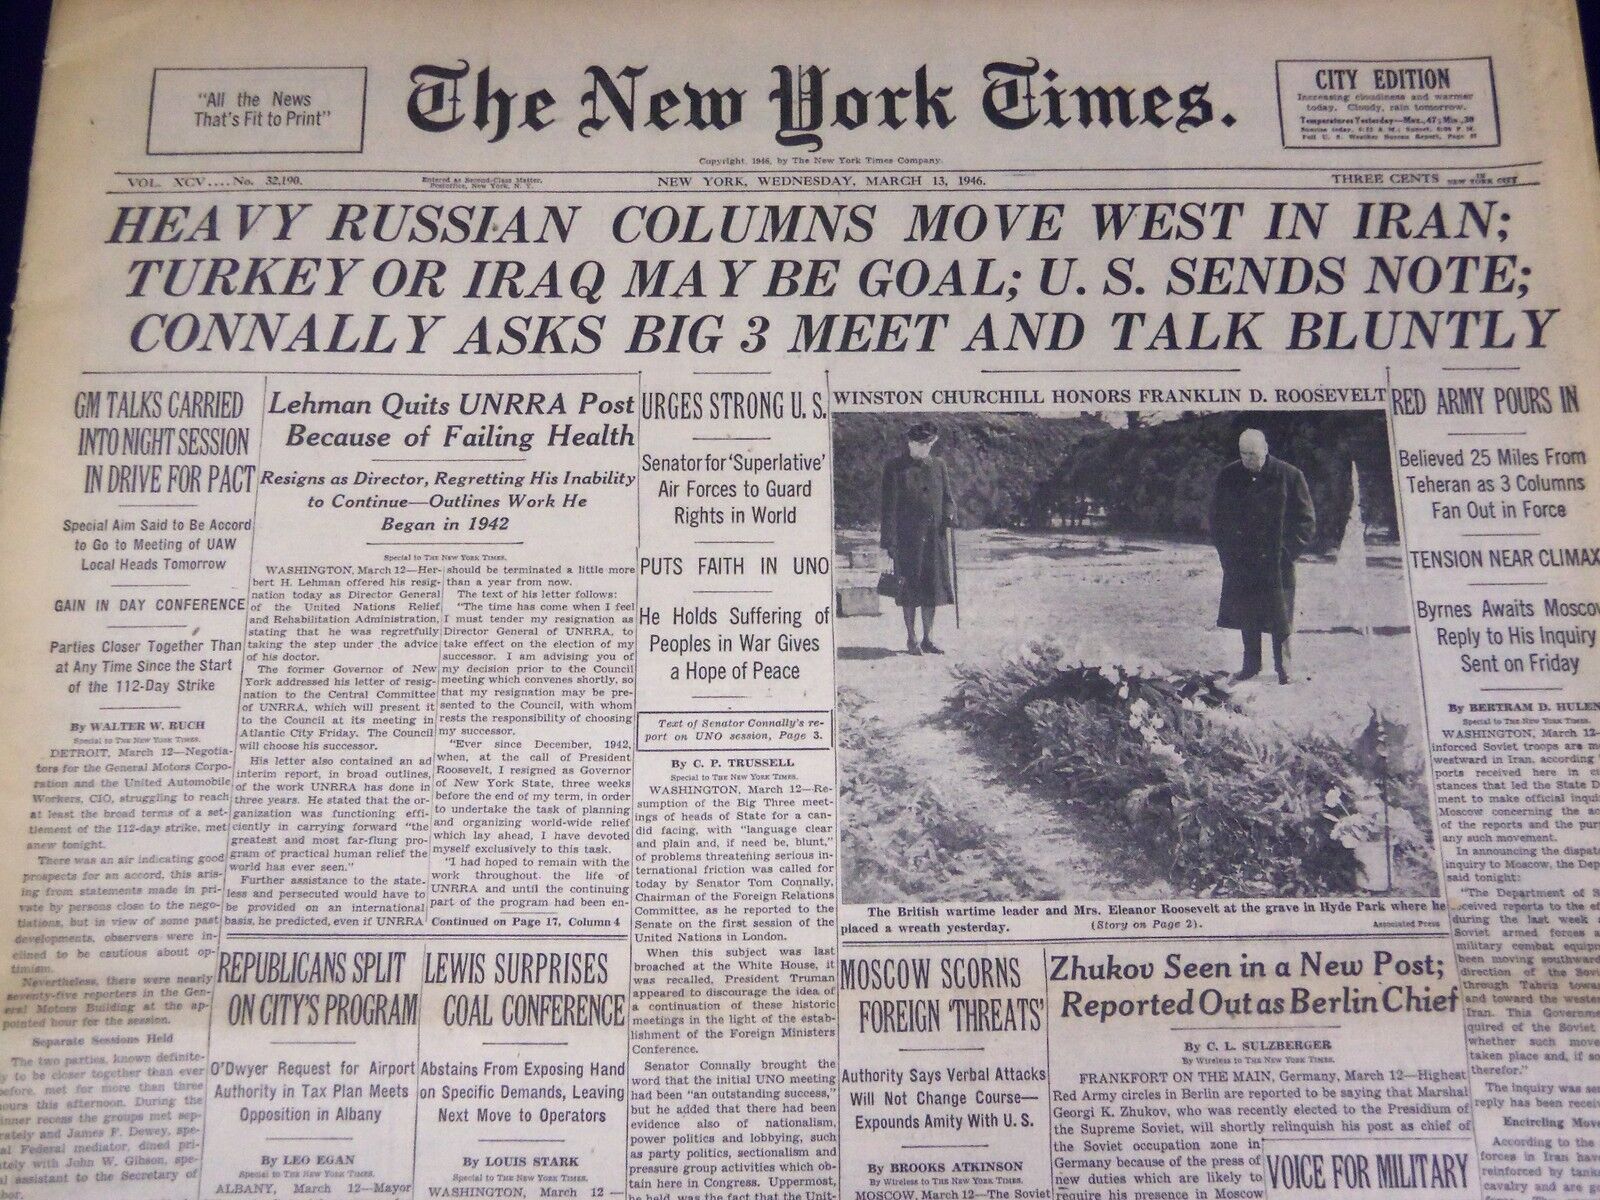 1946 MARCH 13 NEW YORK TIMES - HEAVY RUSSIAN COLUMNS MOVE WEST IN IRAN - NT 879